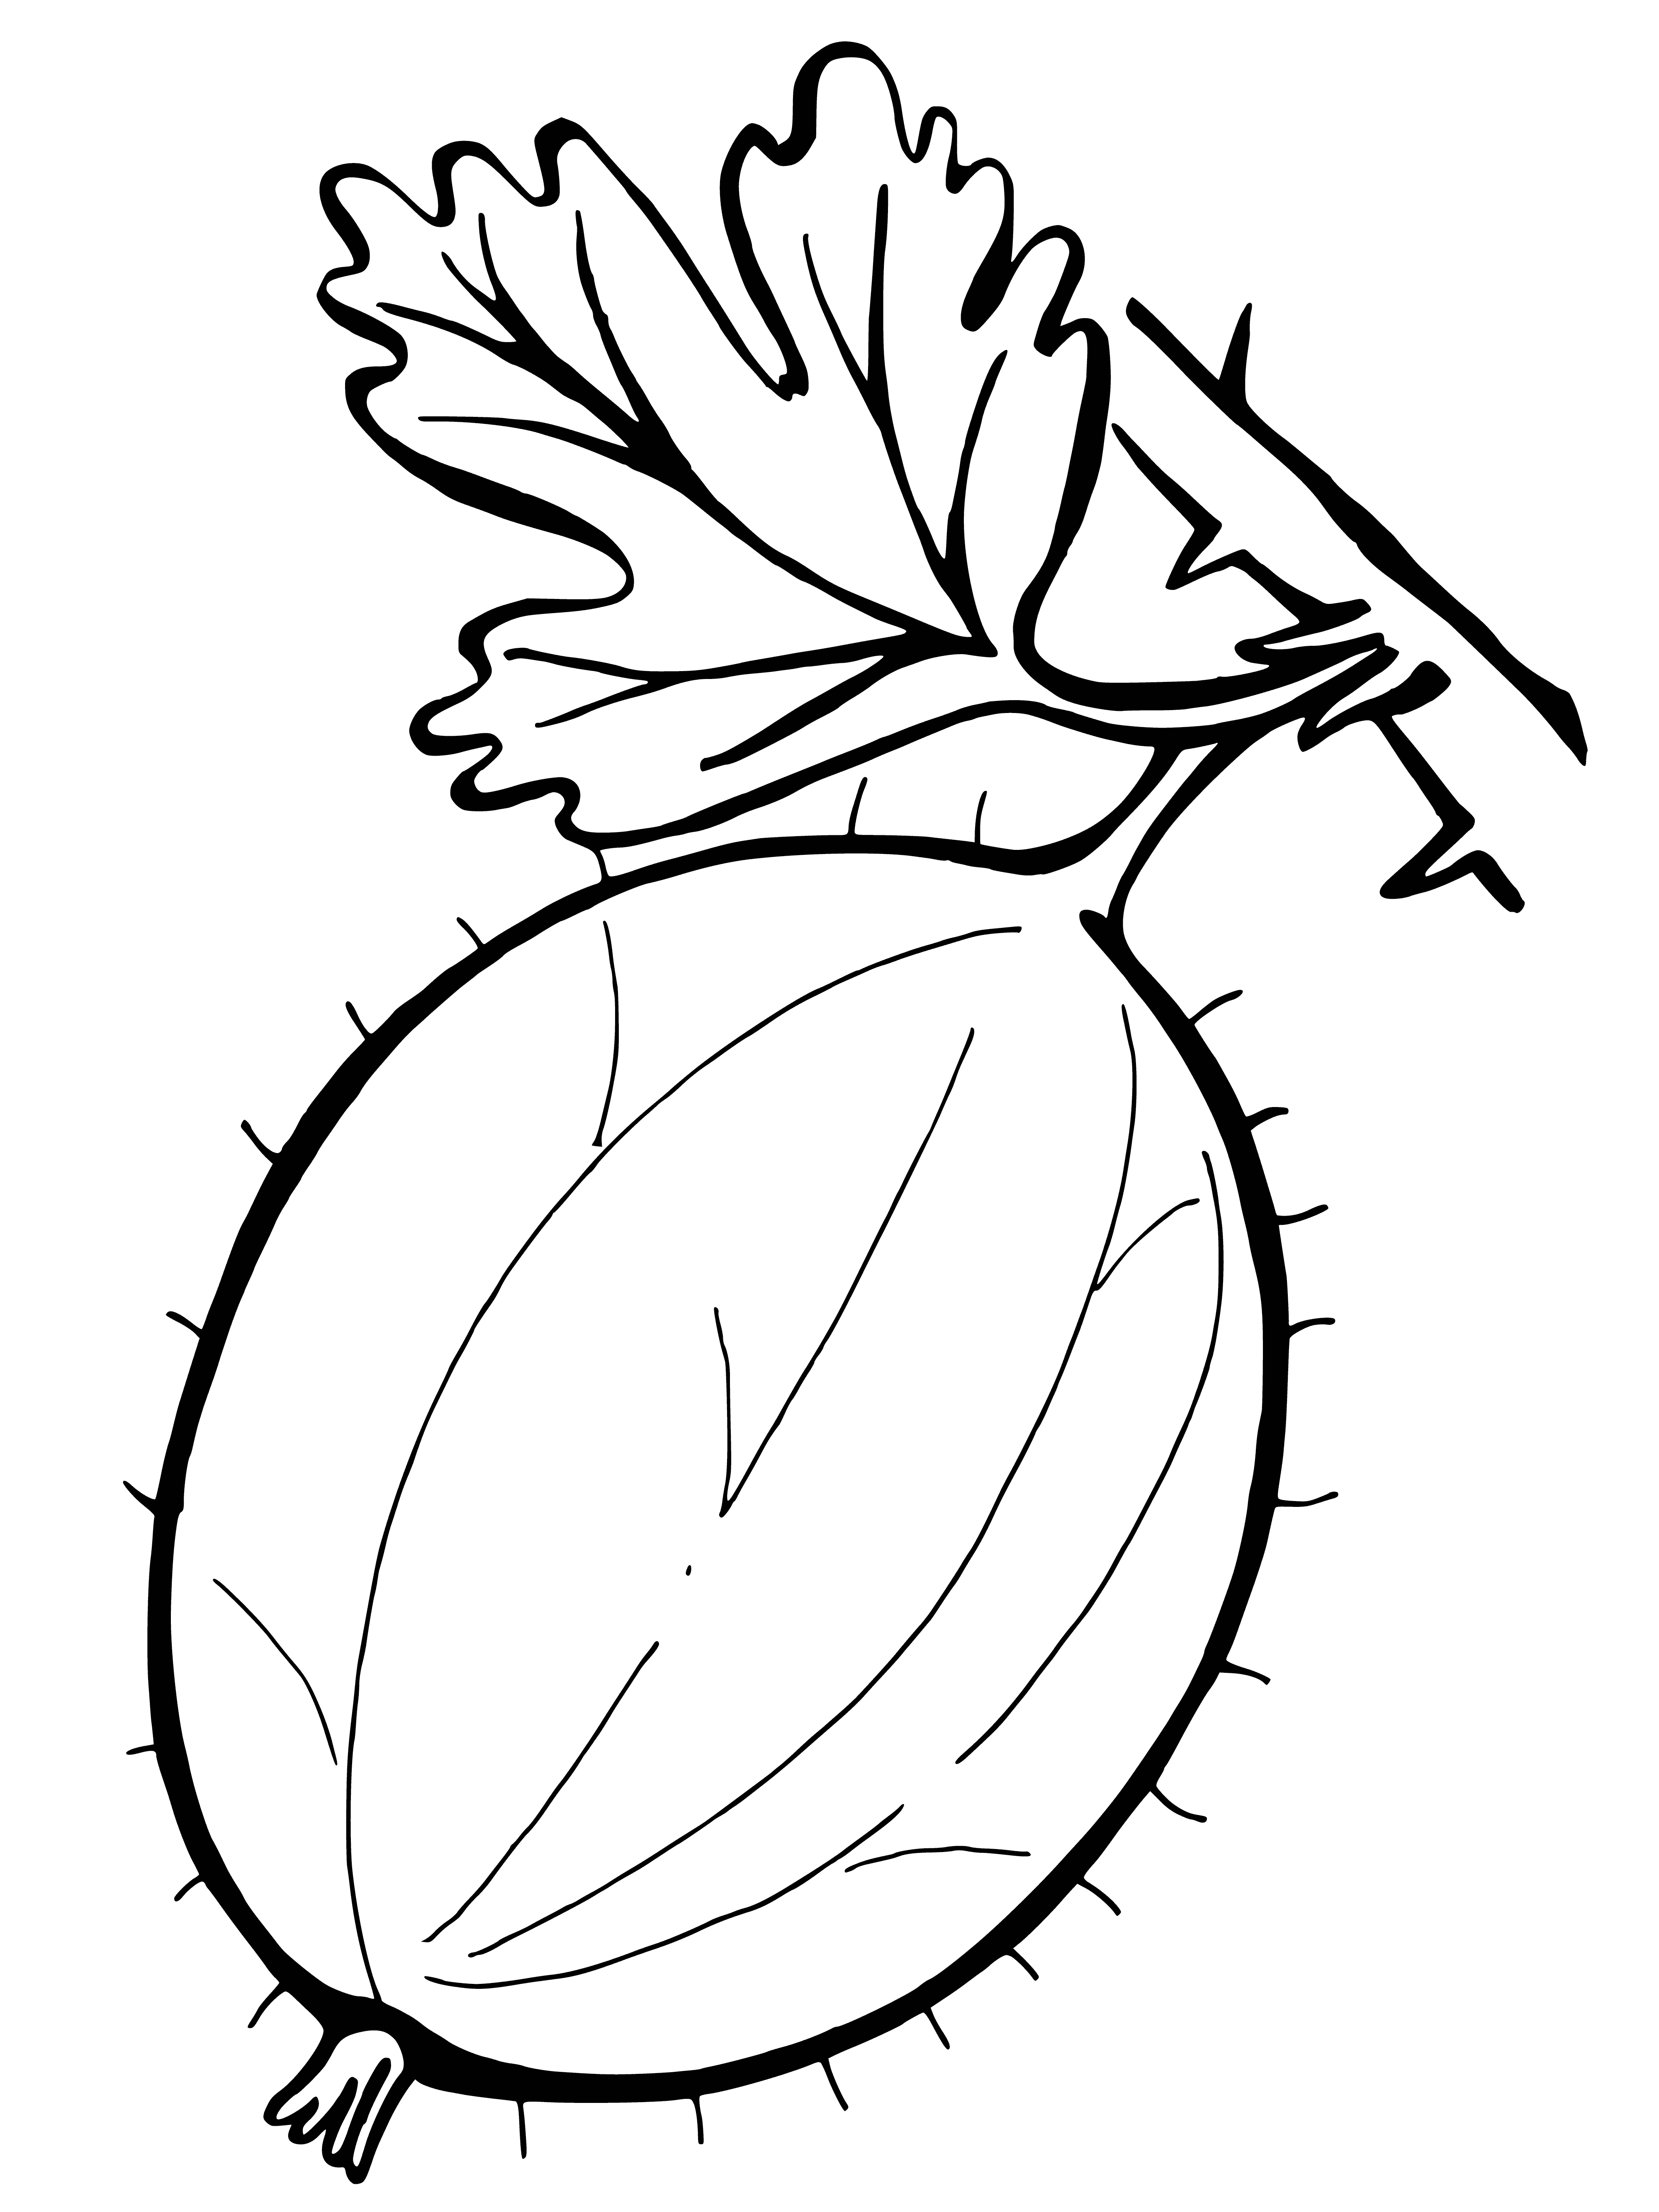 Gooseberry coloring page